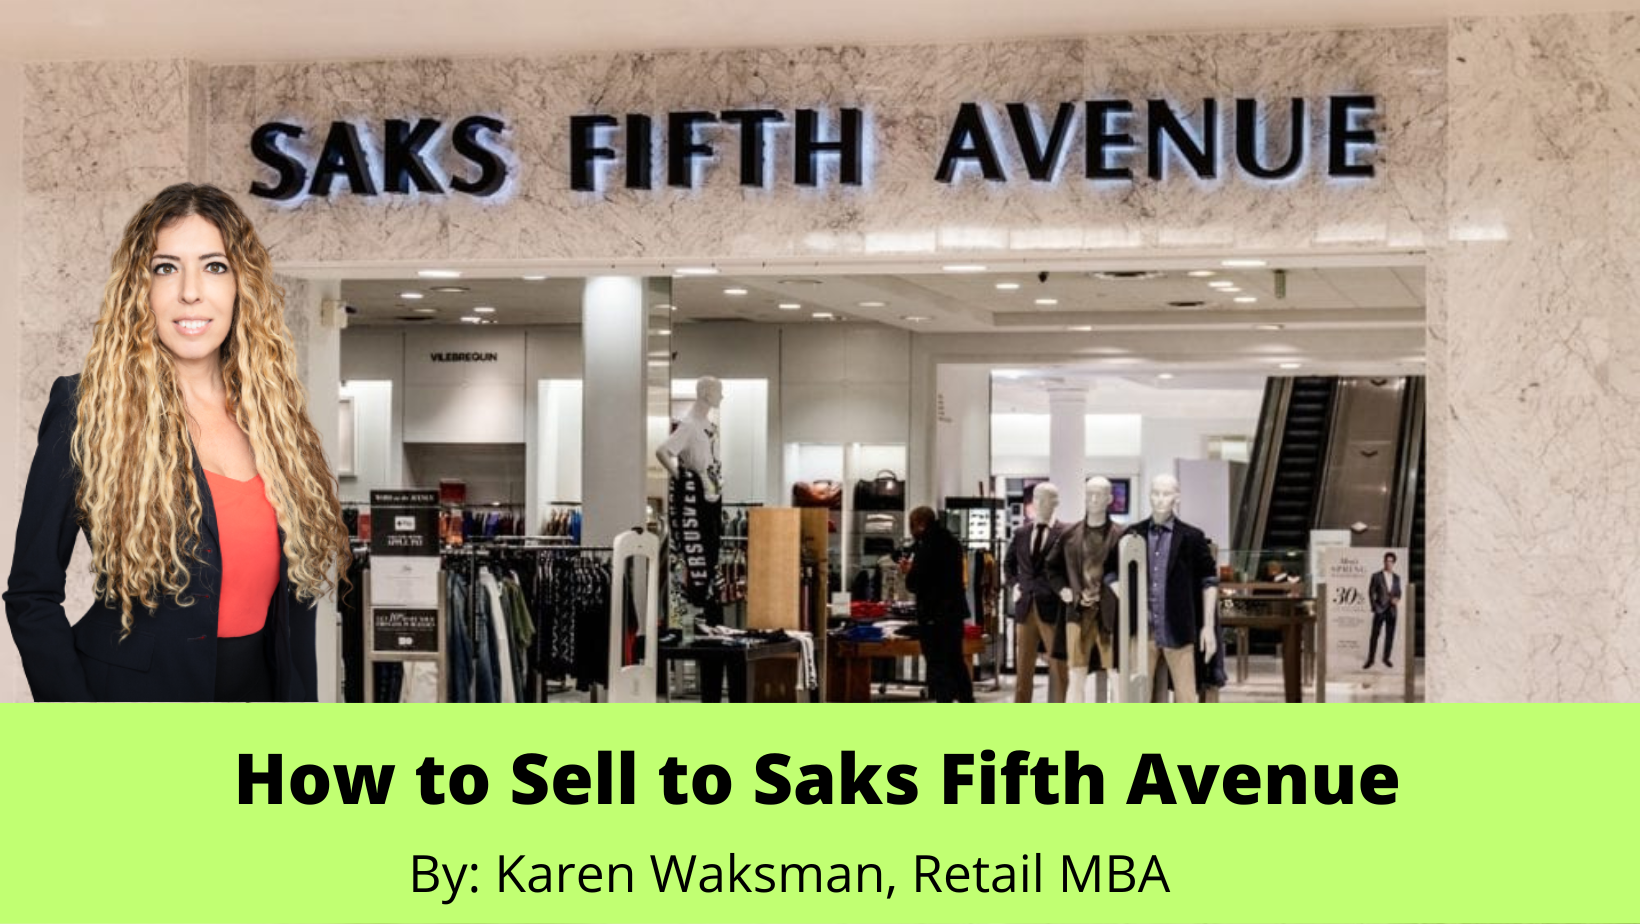 Saks Portal - How to Sell to Saks Fifth Avenue